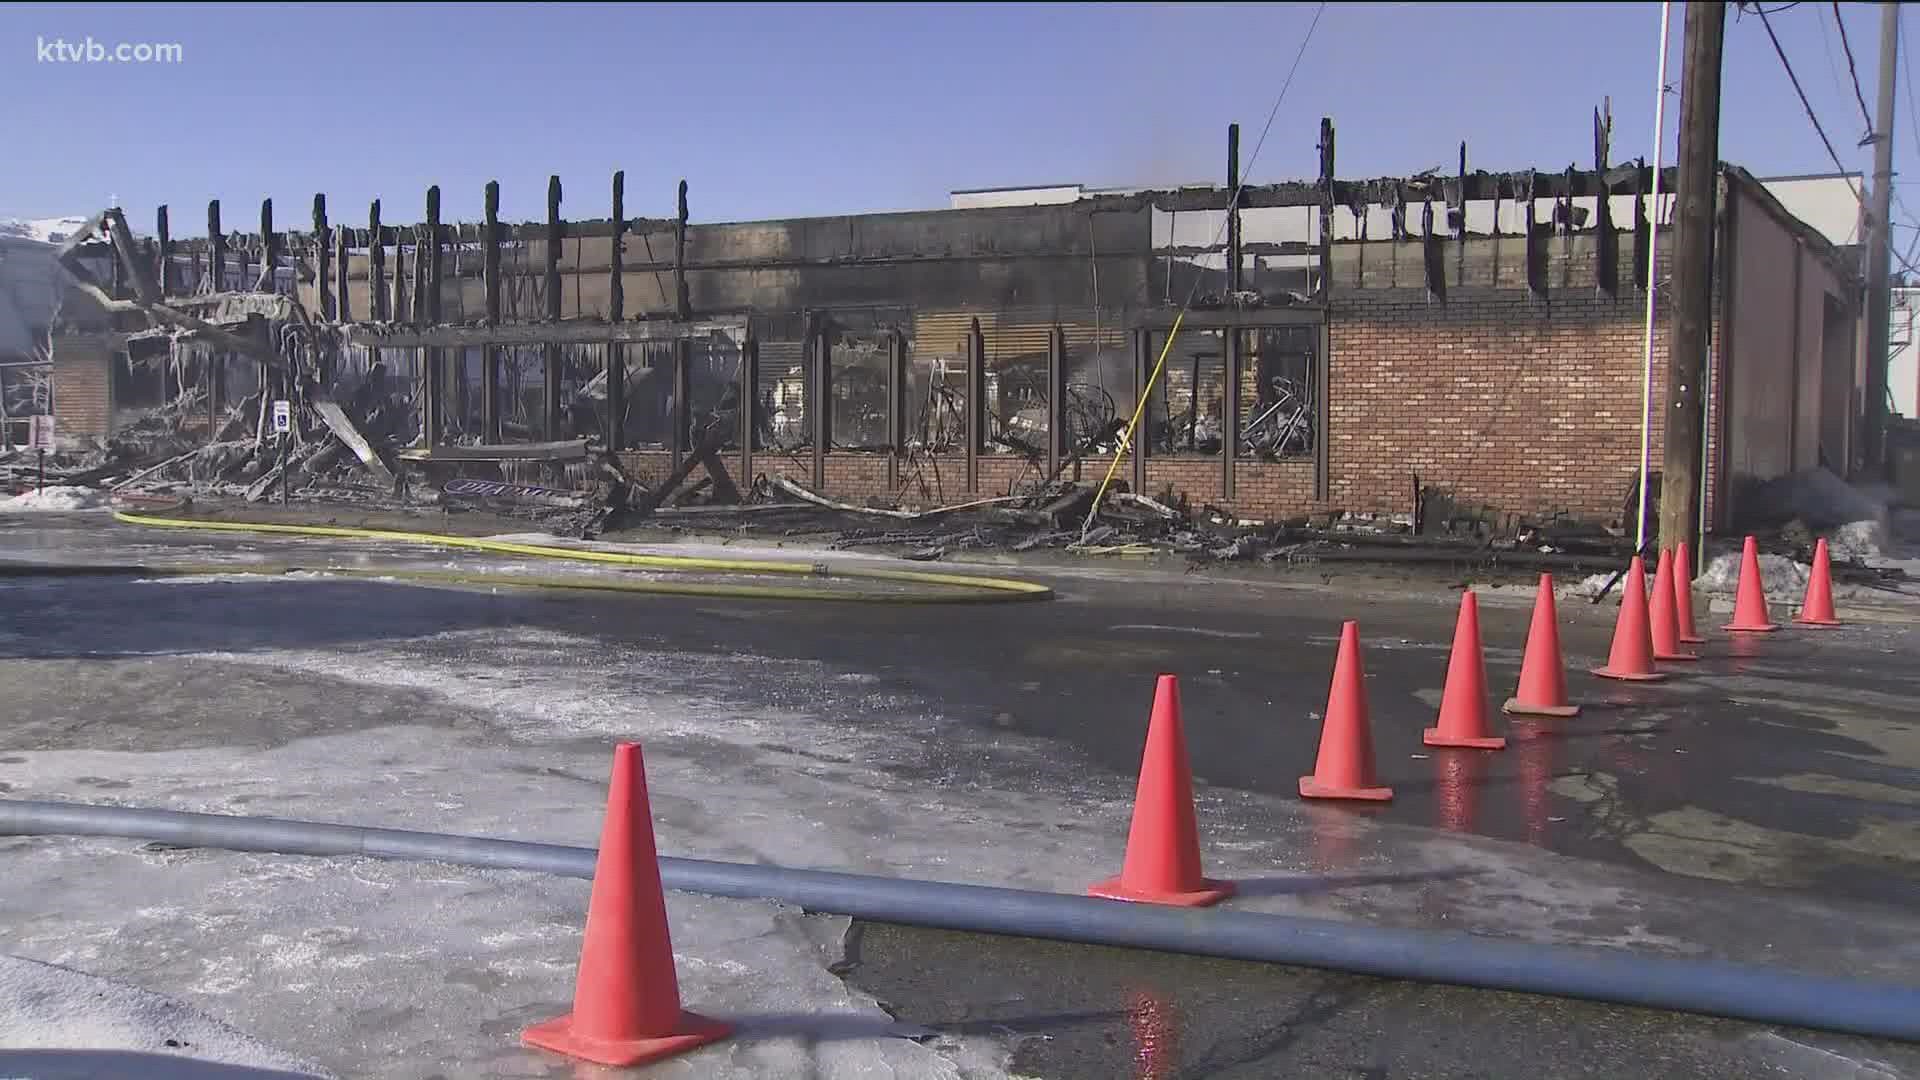 An investigation is underway into what caused the fire at Watkins Pharmacy in Cascade Tuesday morning. Owners Ben and Amber Watkins discussed the tragedy with KTVB.